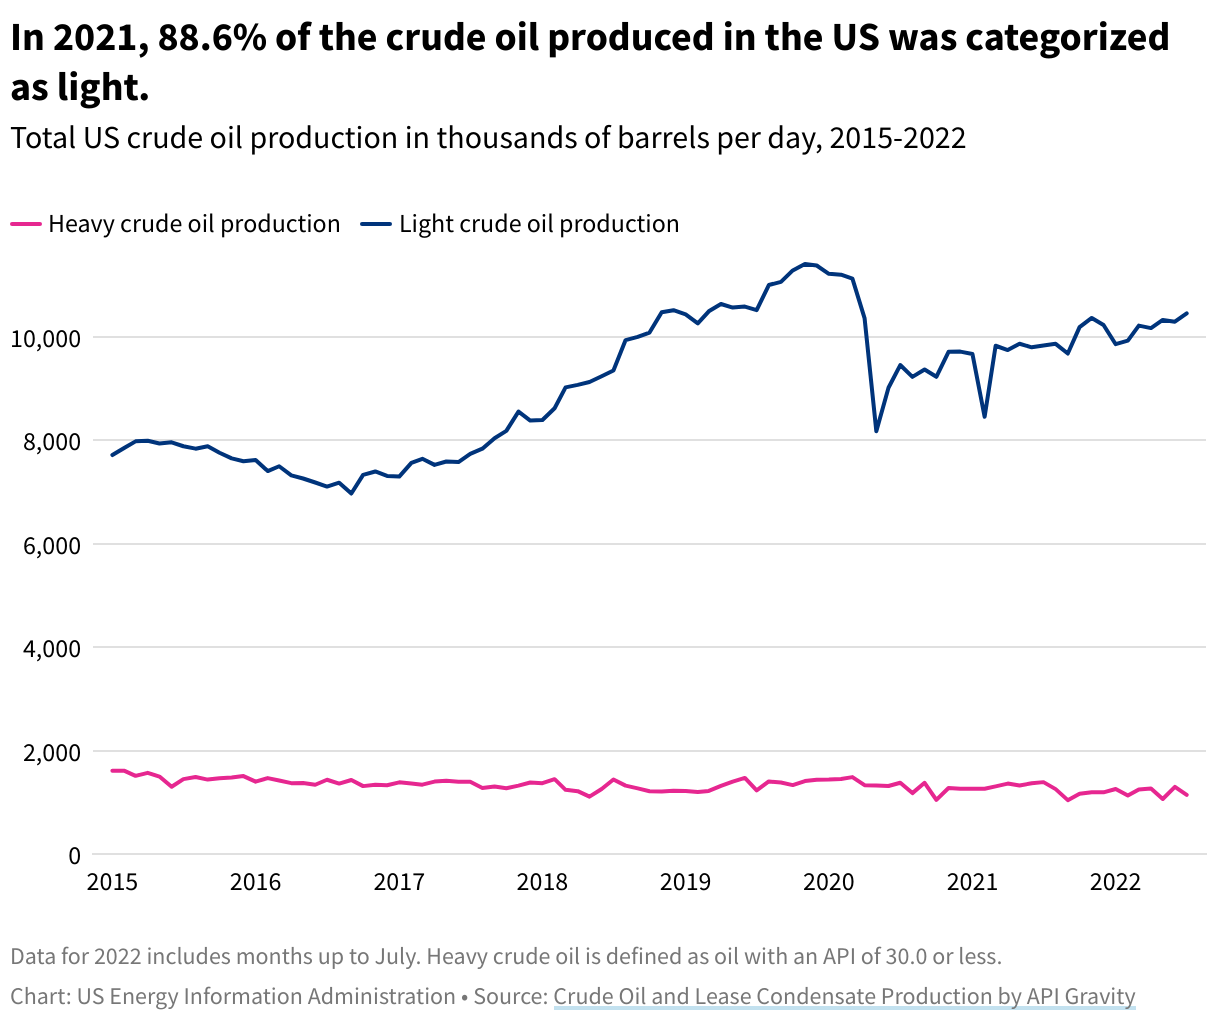 A line graph depicting total US crude oil production in thousands of barrels per day between 2015 to 2022.